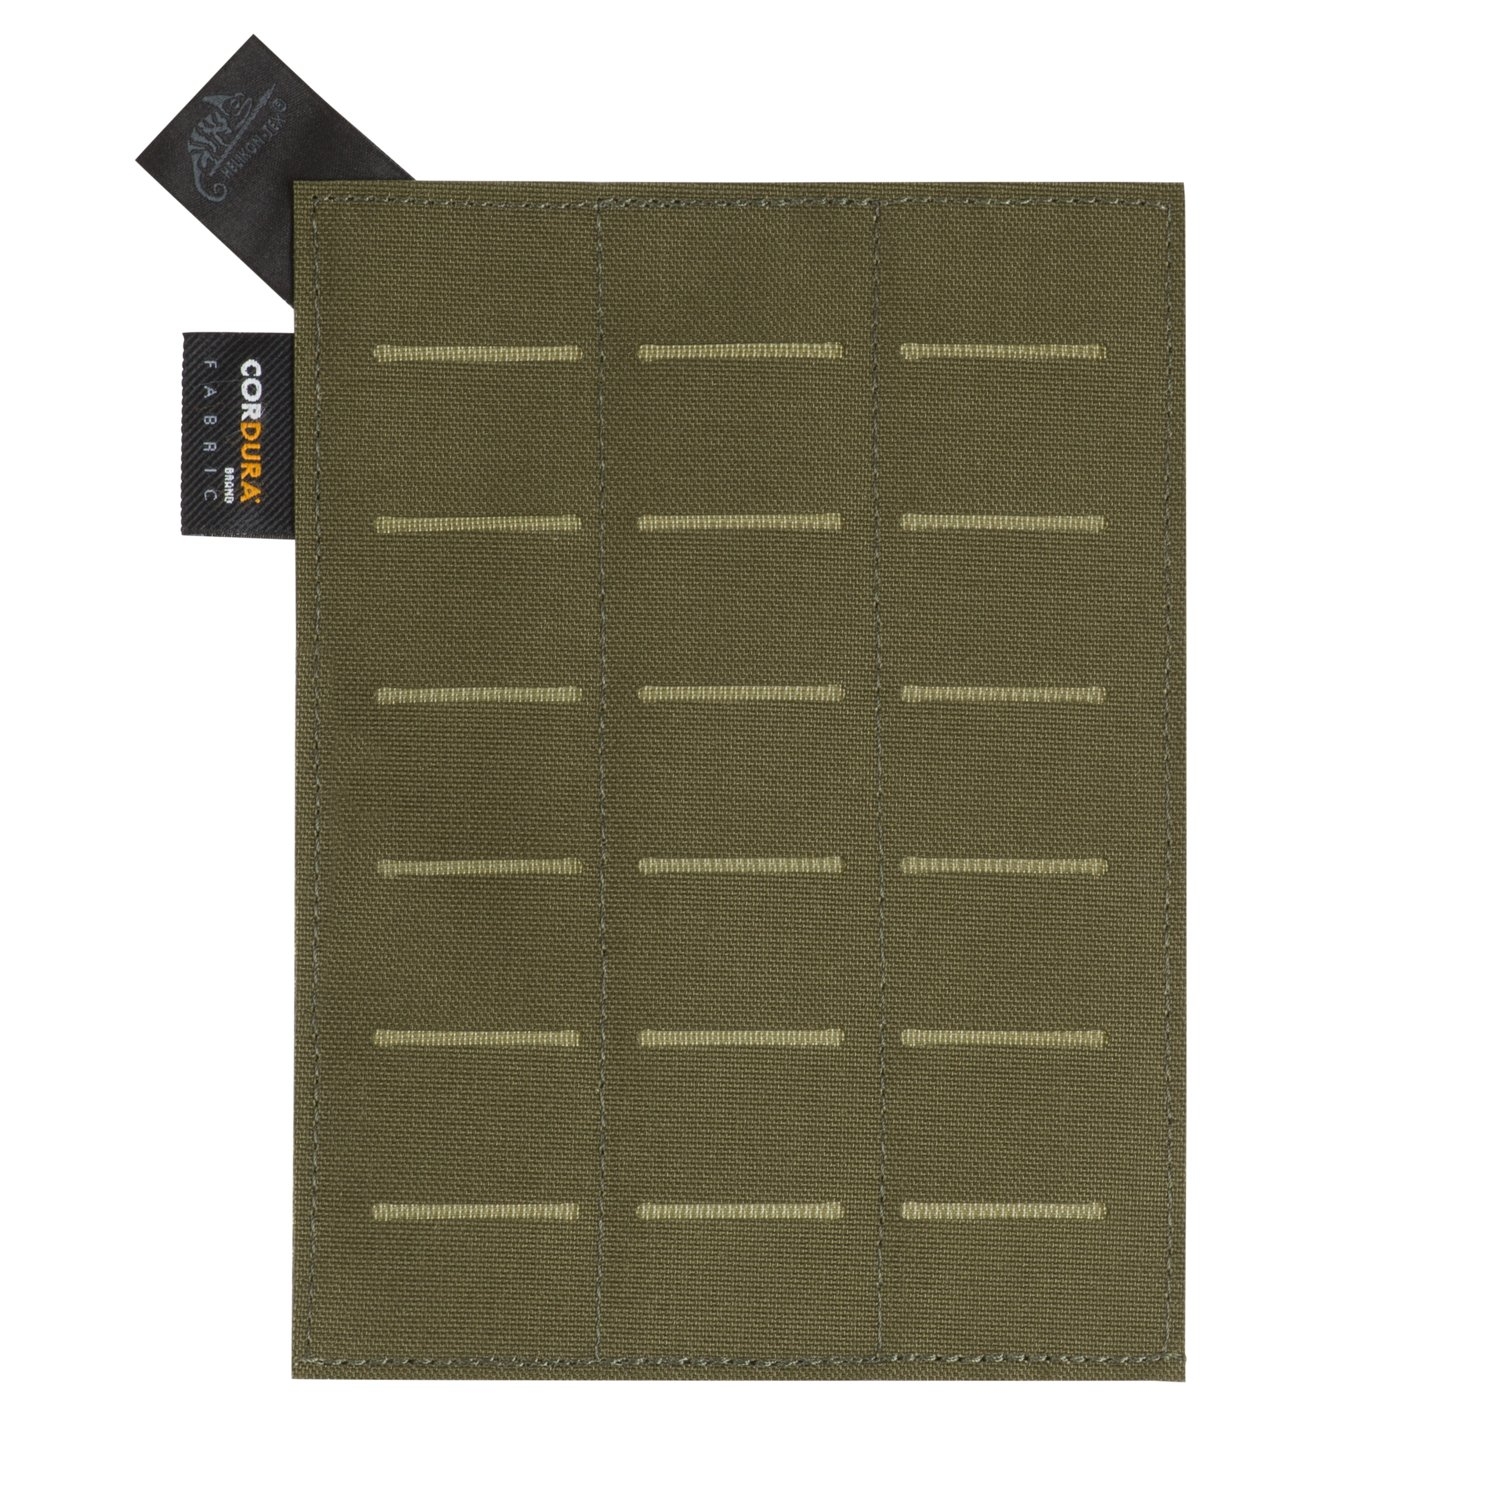 Image of Insert HELIKON MOLLE ADAPTER INSERT 3 - Cordura - Olive Green - One Size (IN-MA3-CD-02)